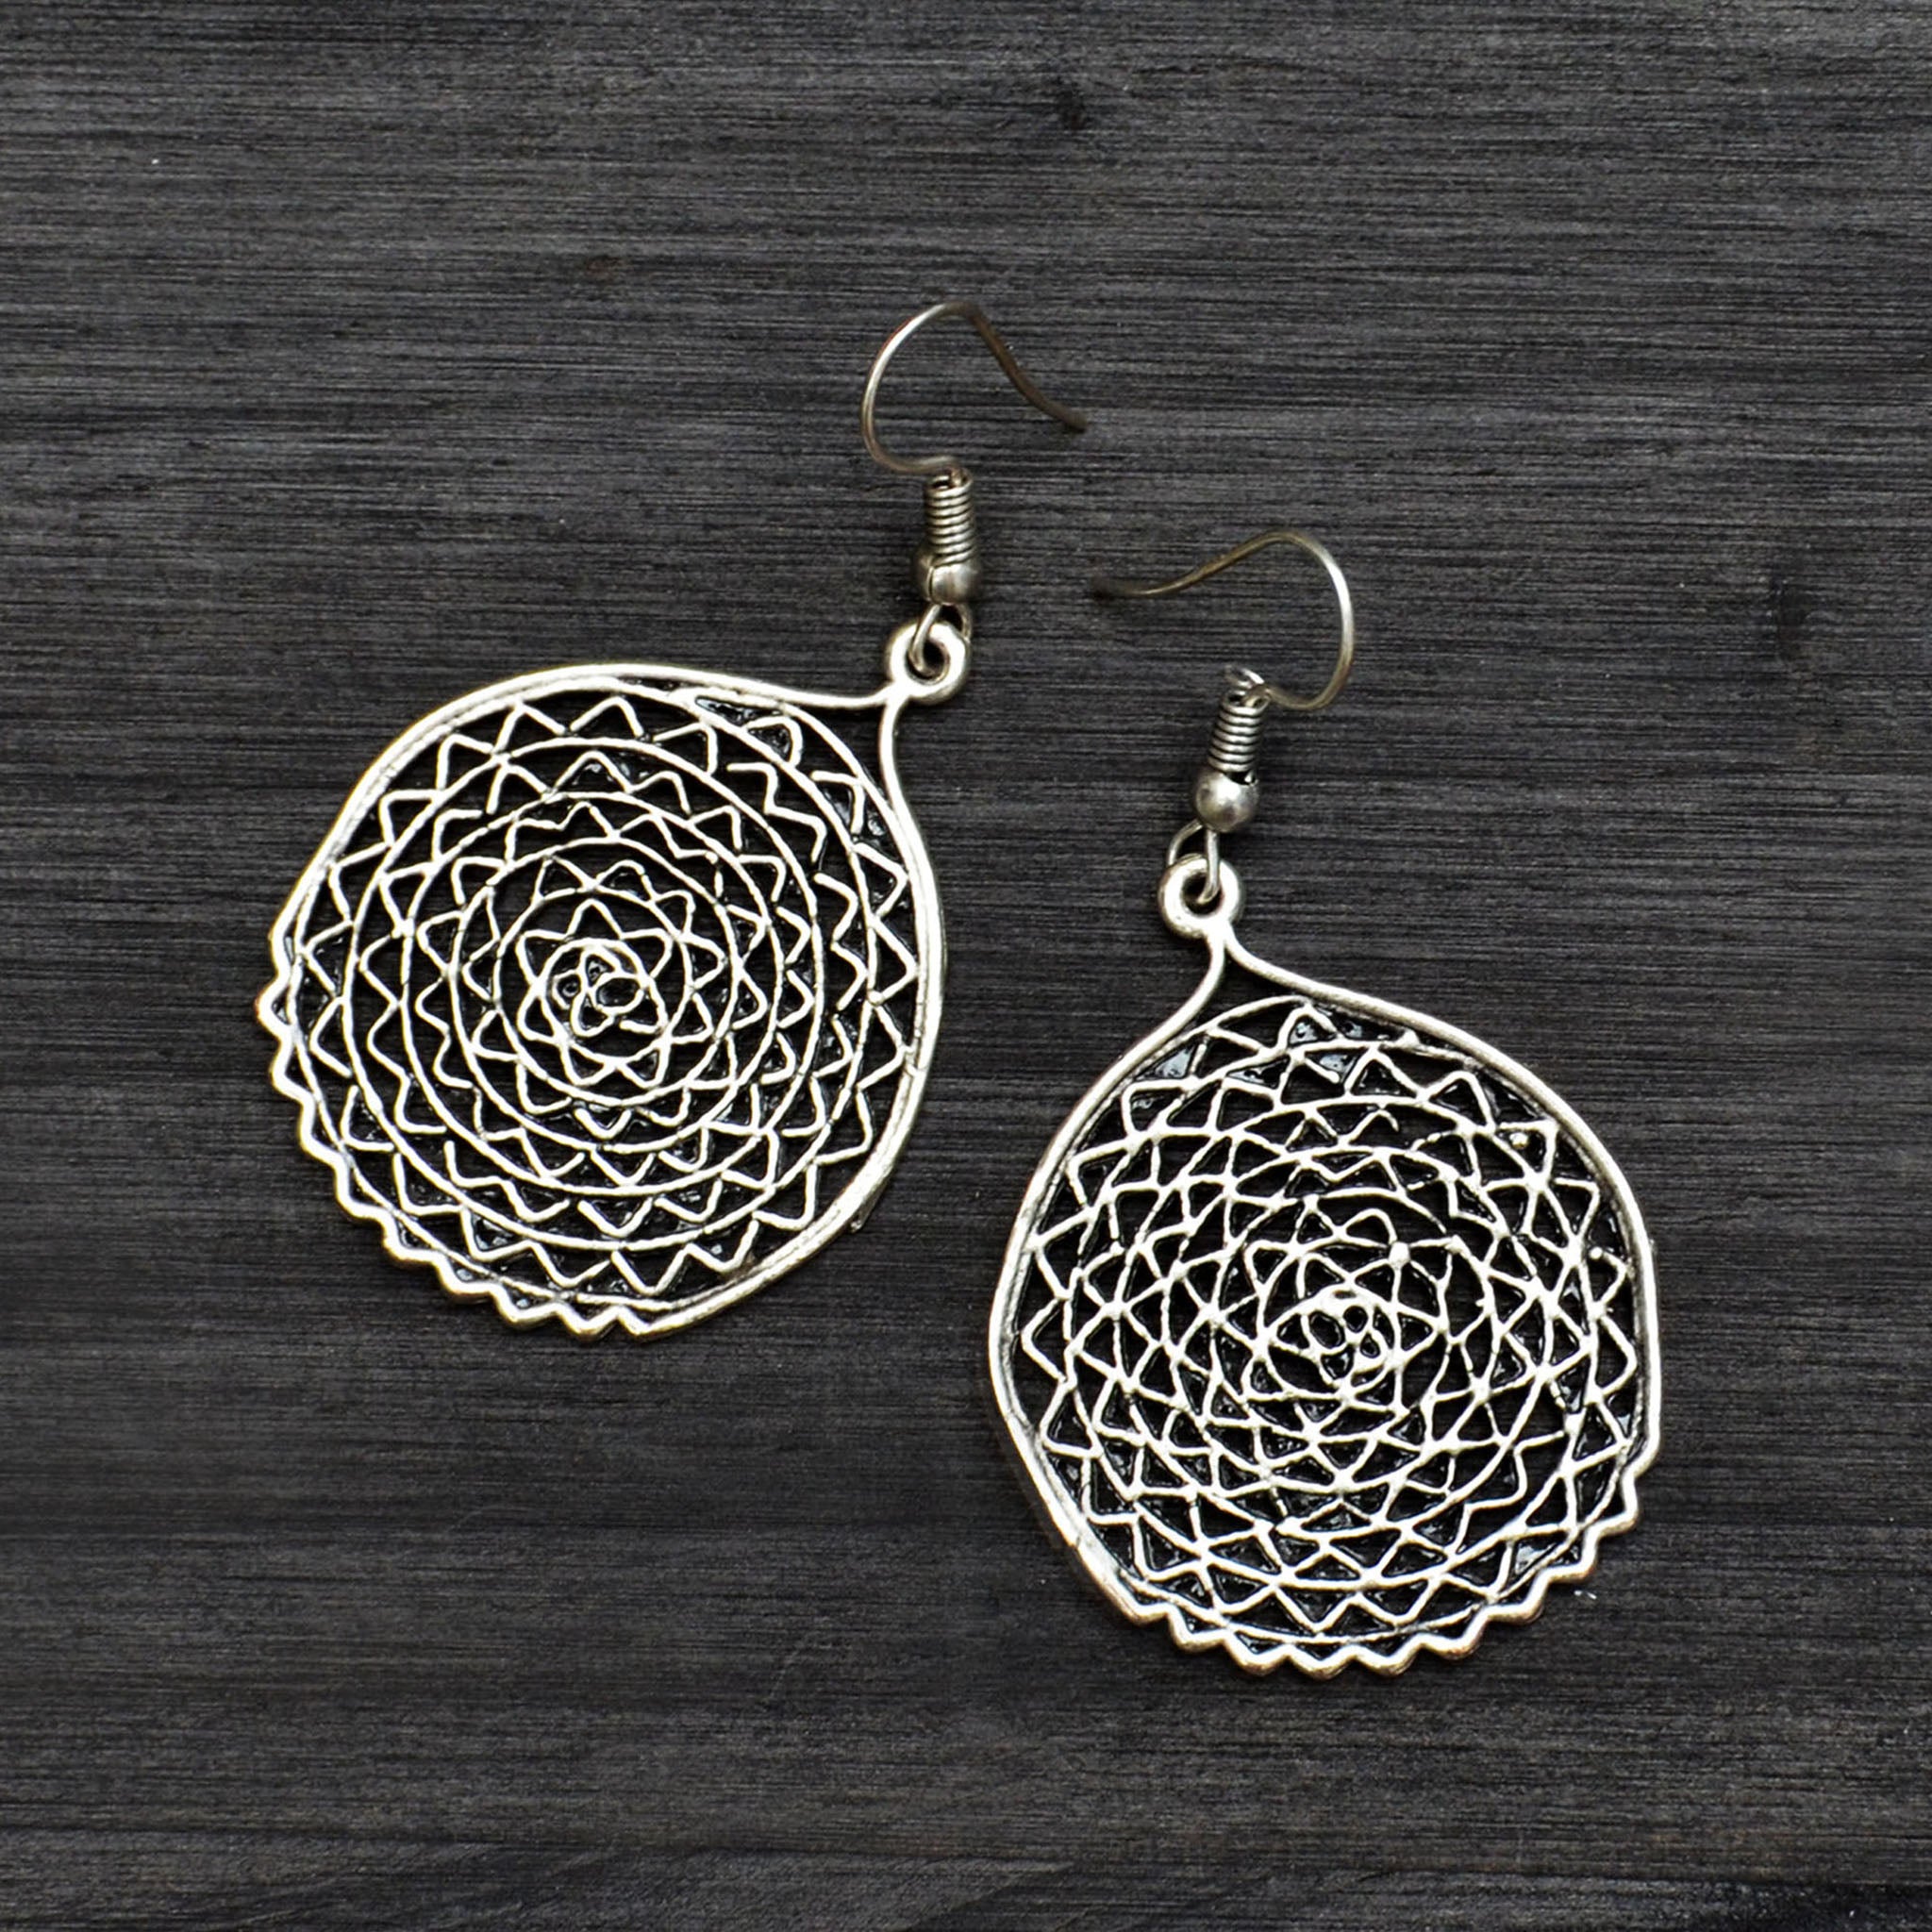 Silver filigree round dangle earrings on gray background